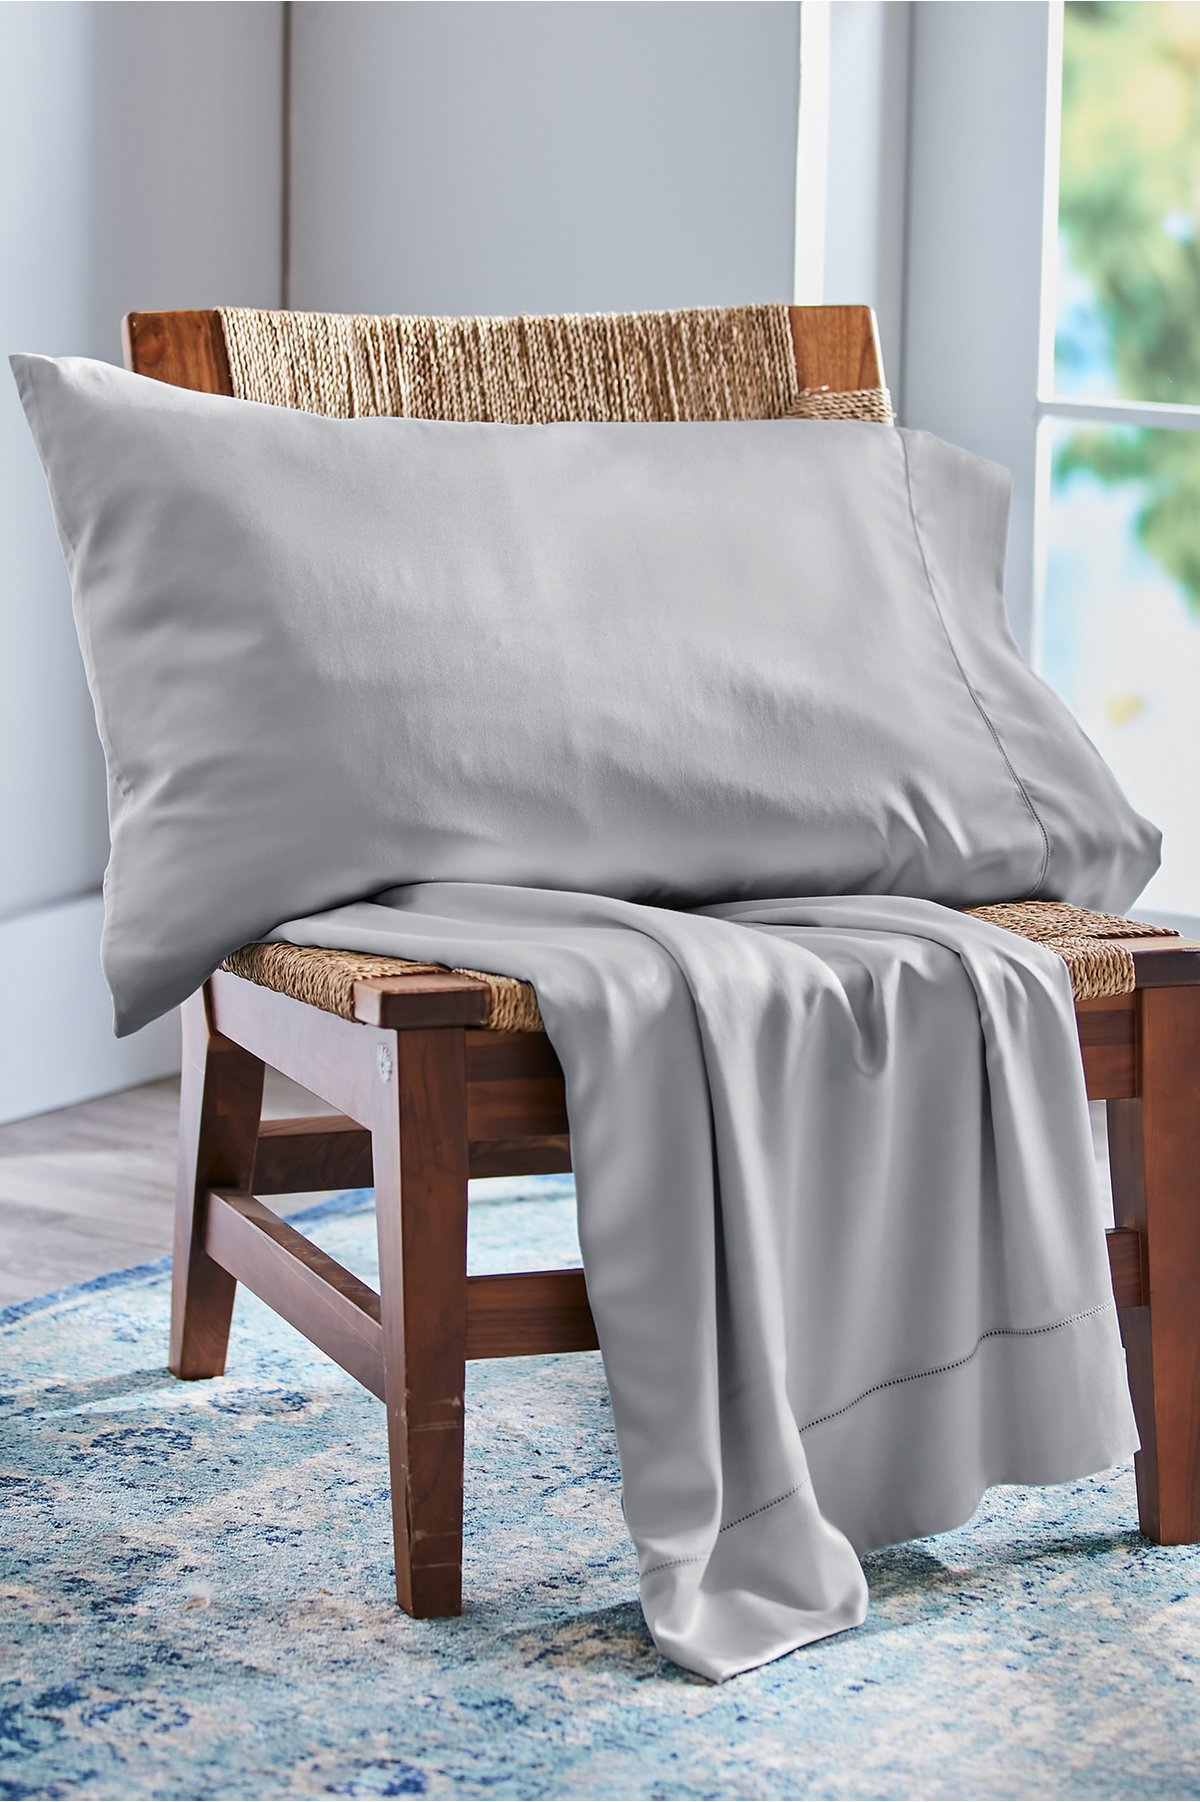 Blissful Bamboo Sheet Set by Soft Surroundings, in Cloud Grey size Queen